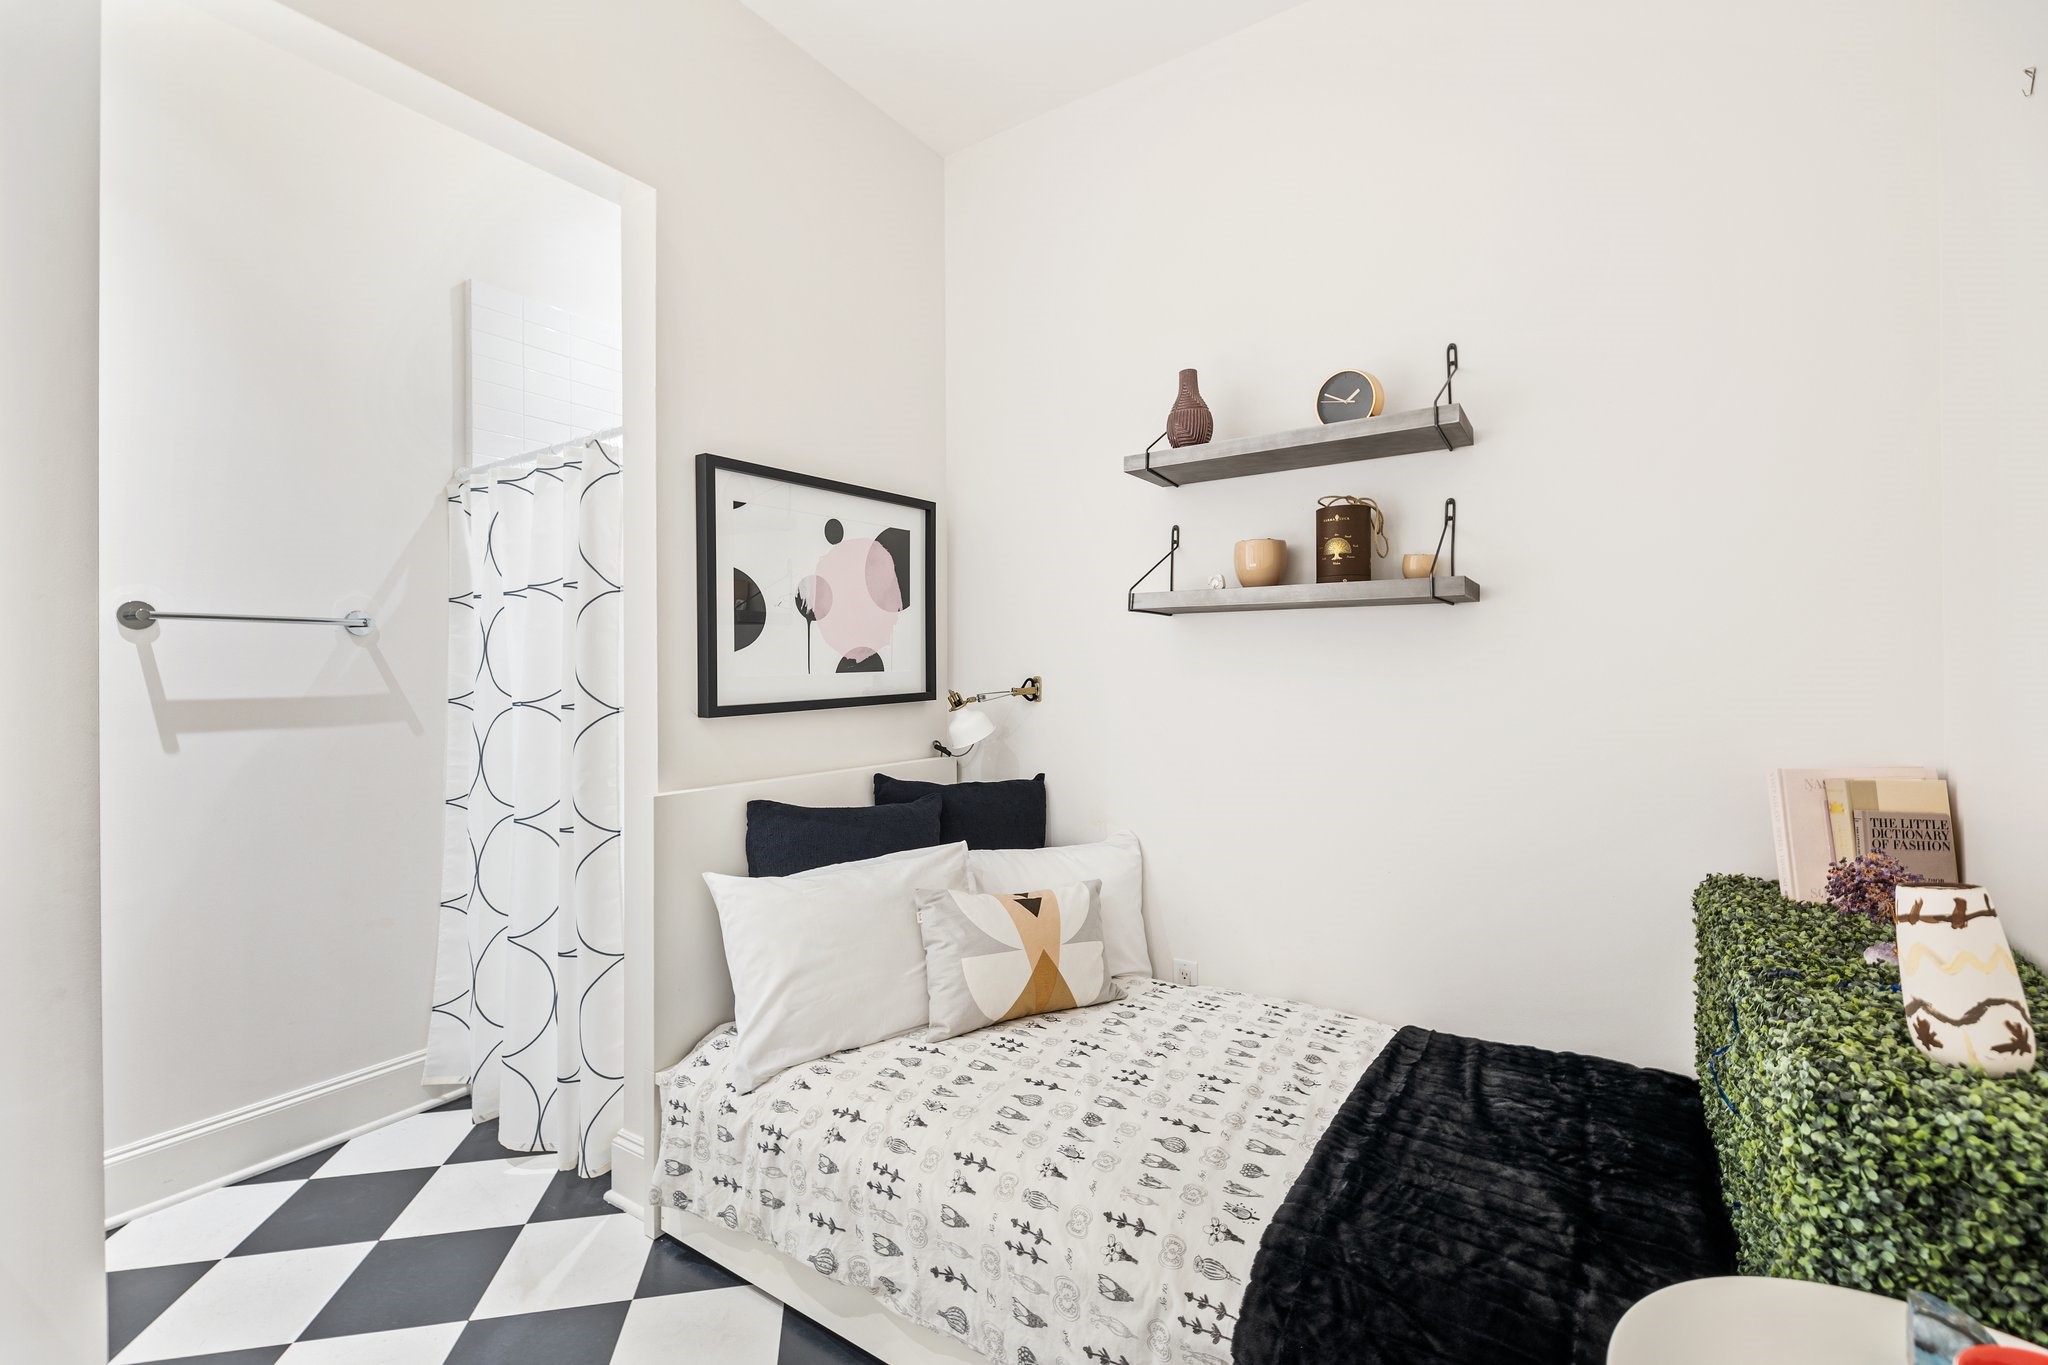 A welcoming 4th bedroom with modern decor, versatile as a guest suite or nanny's quarters. It boasts geometric flooring, sleek shelving, and artistic wall accents.